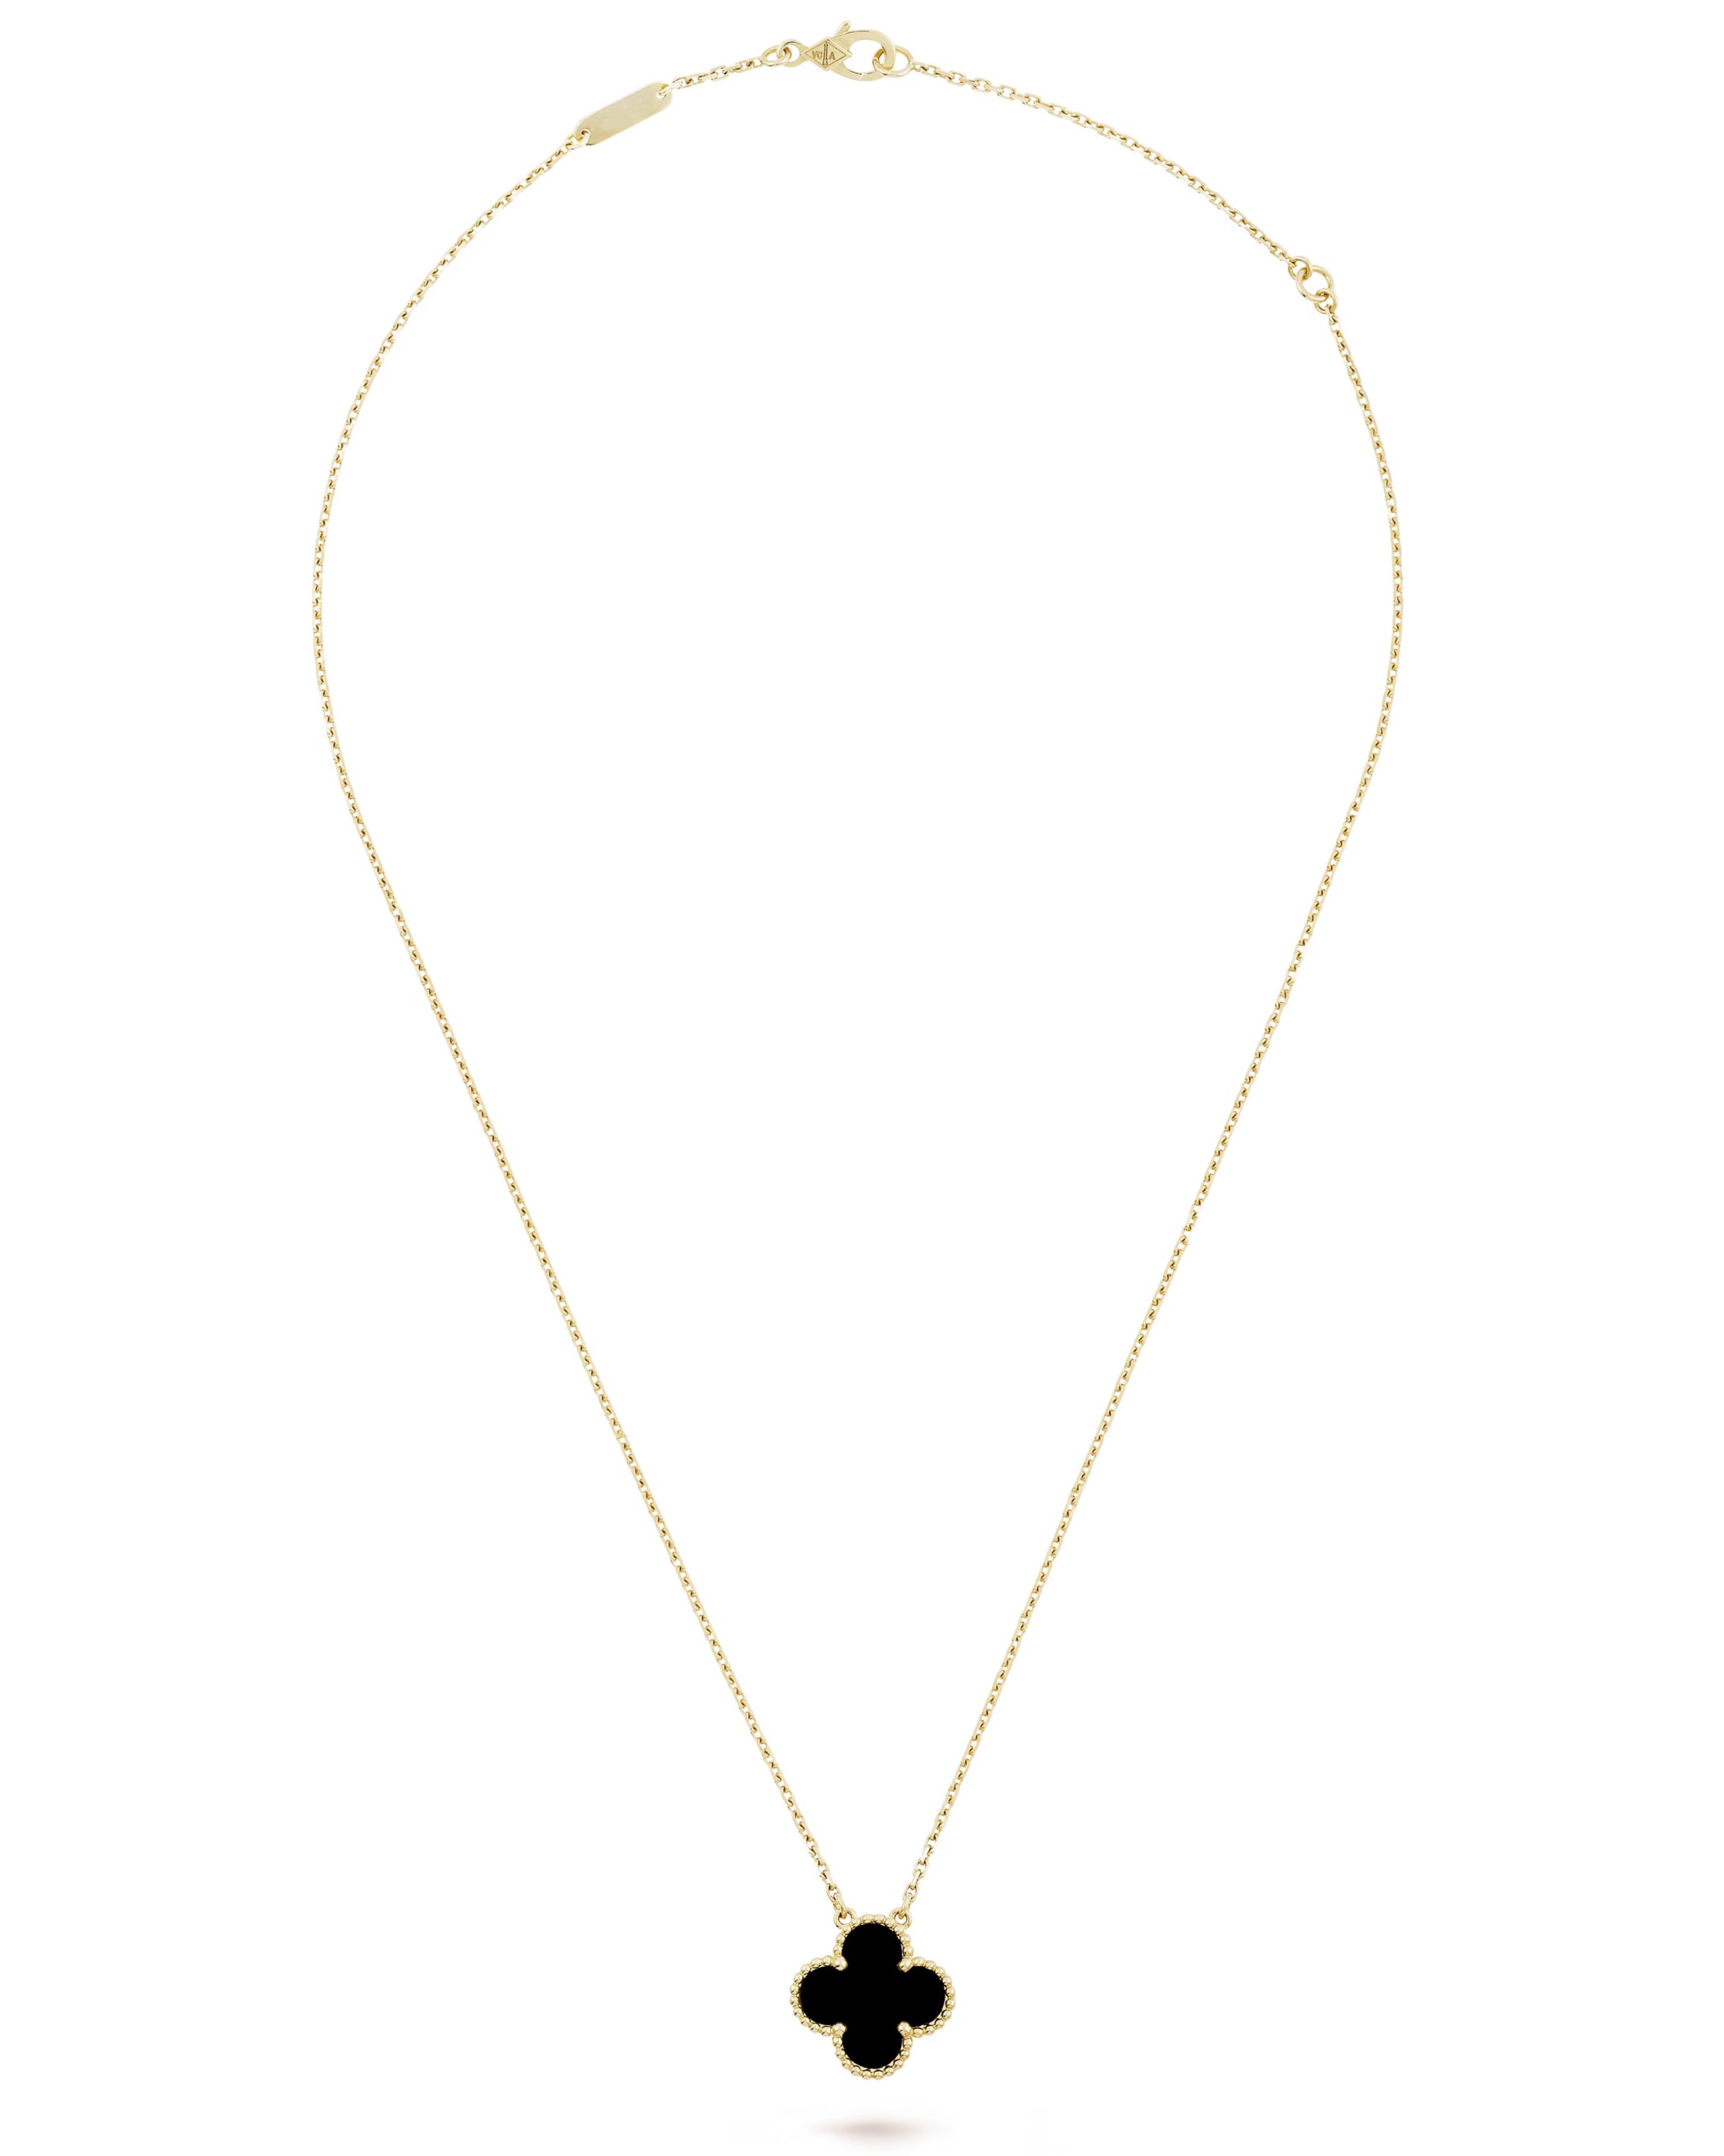 DÂY CHUYỀN VAN CLEEF & ARPELS VINTAGE ALHAMBRA NECKLACE PENDANT IN GOLD VCARA45800 1